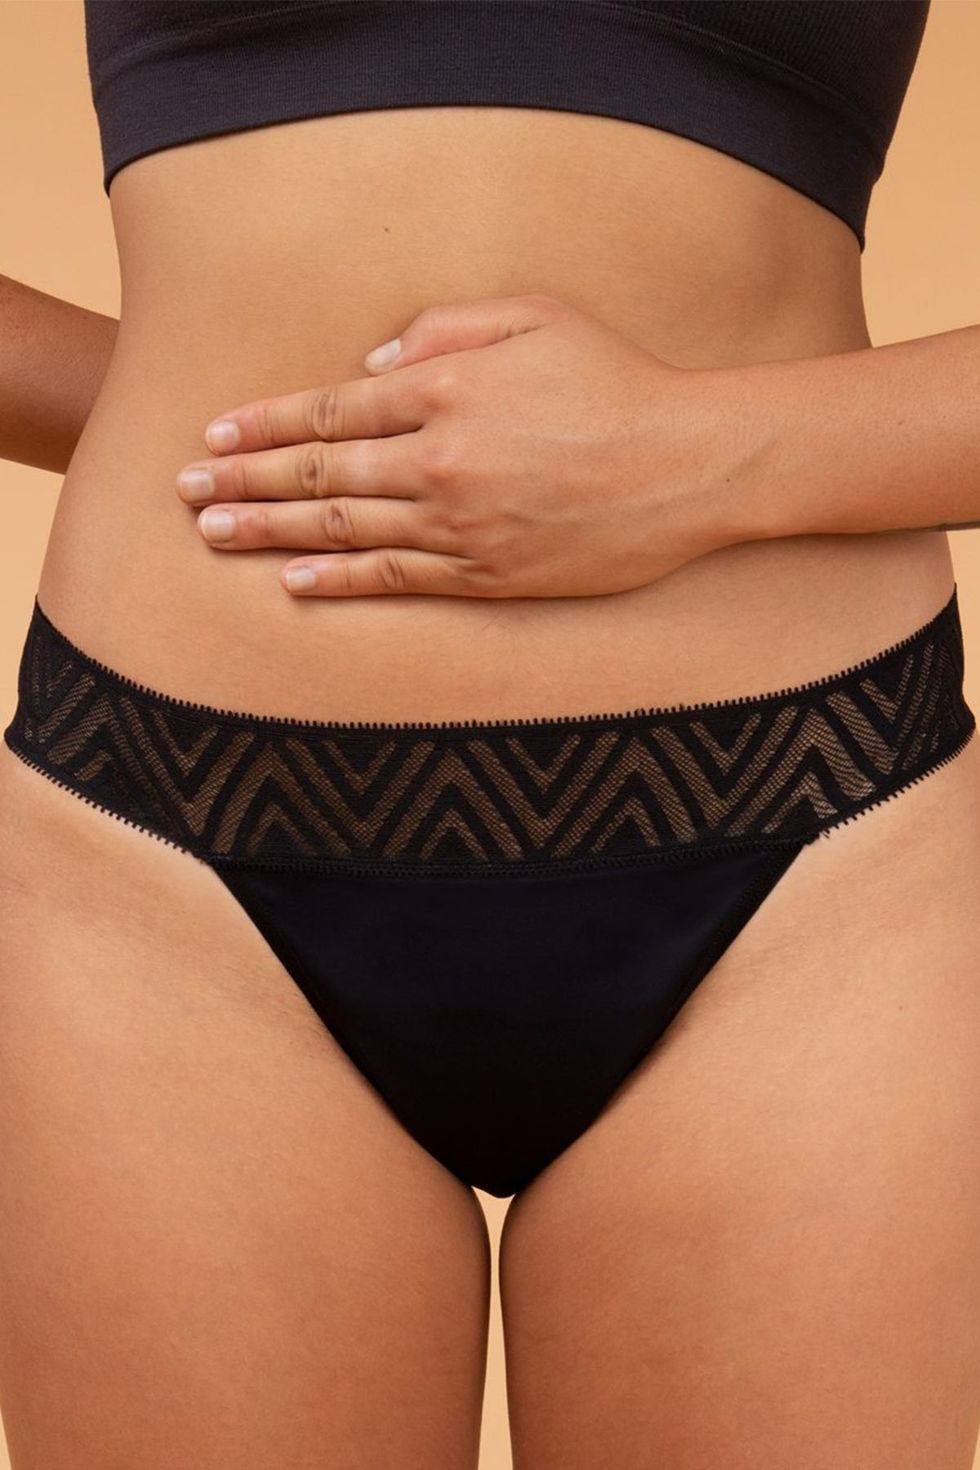 The Best Underwear for Your Period - 10 Must-Have Pairs of Period